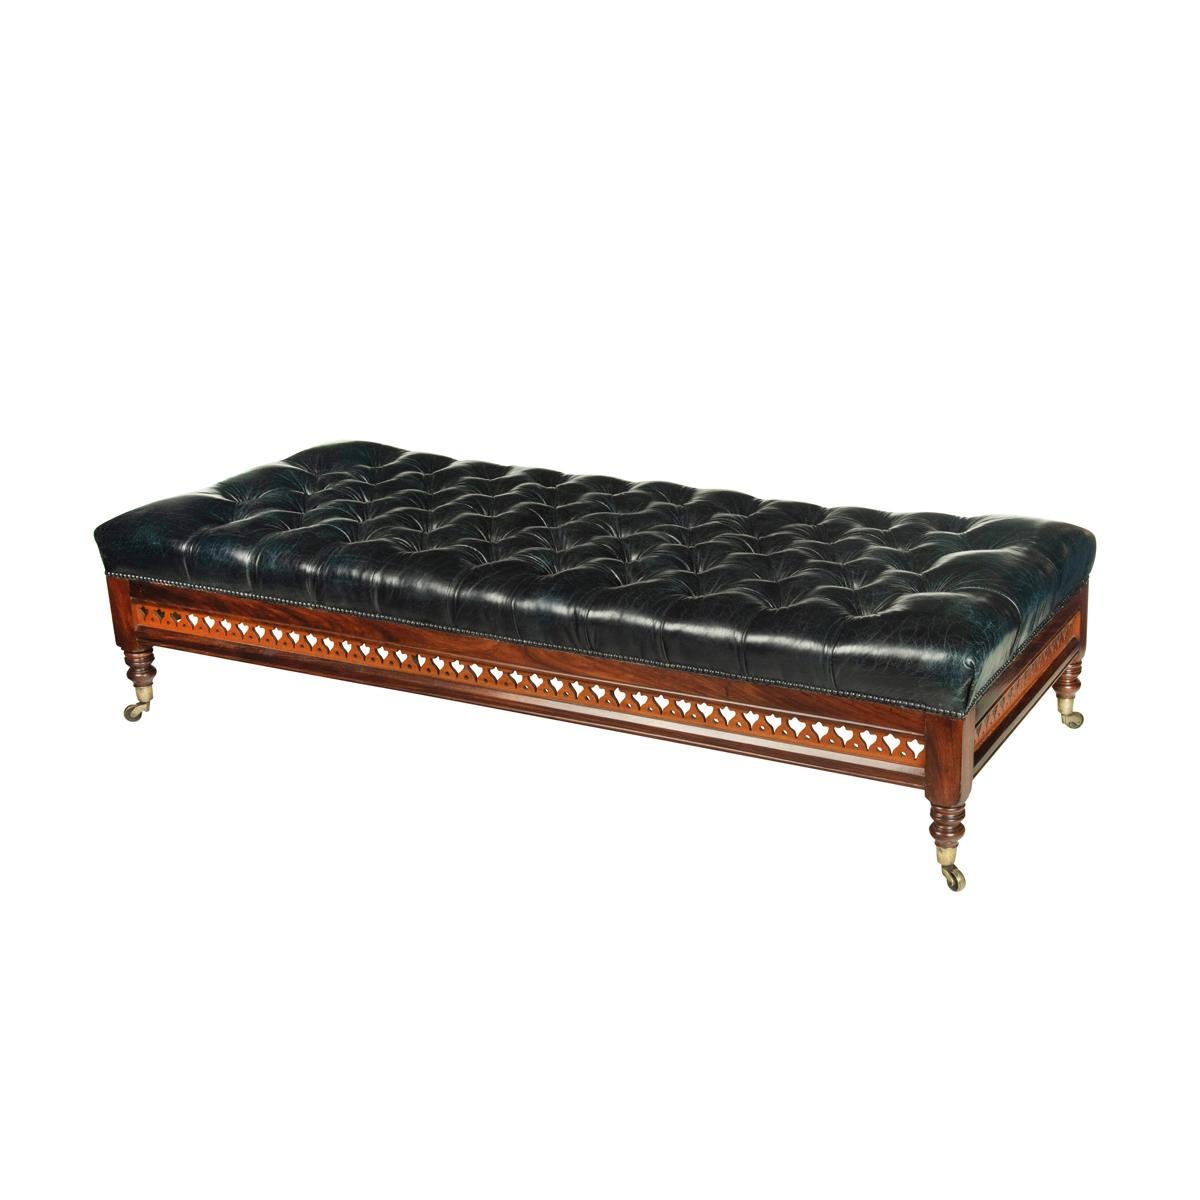 A large Victorian leather stool, of long rectangular form, the deep buttoned top reupholstered in blue-black leather, the frieze pierced with a band of flower-buds, all raised on turned legs with the original castors, a maker’s label underneath